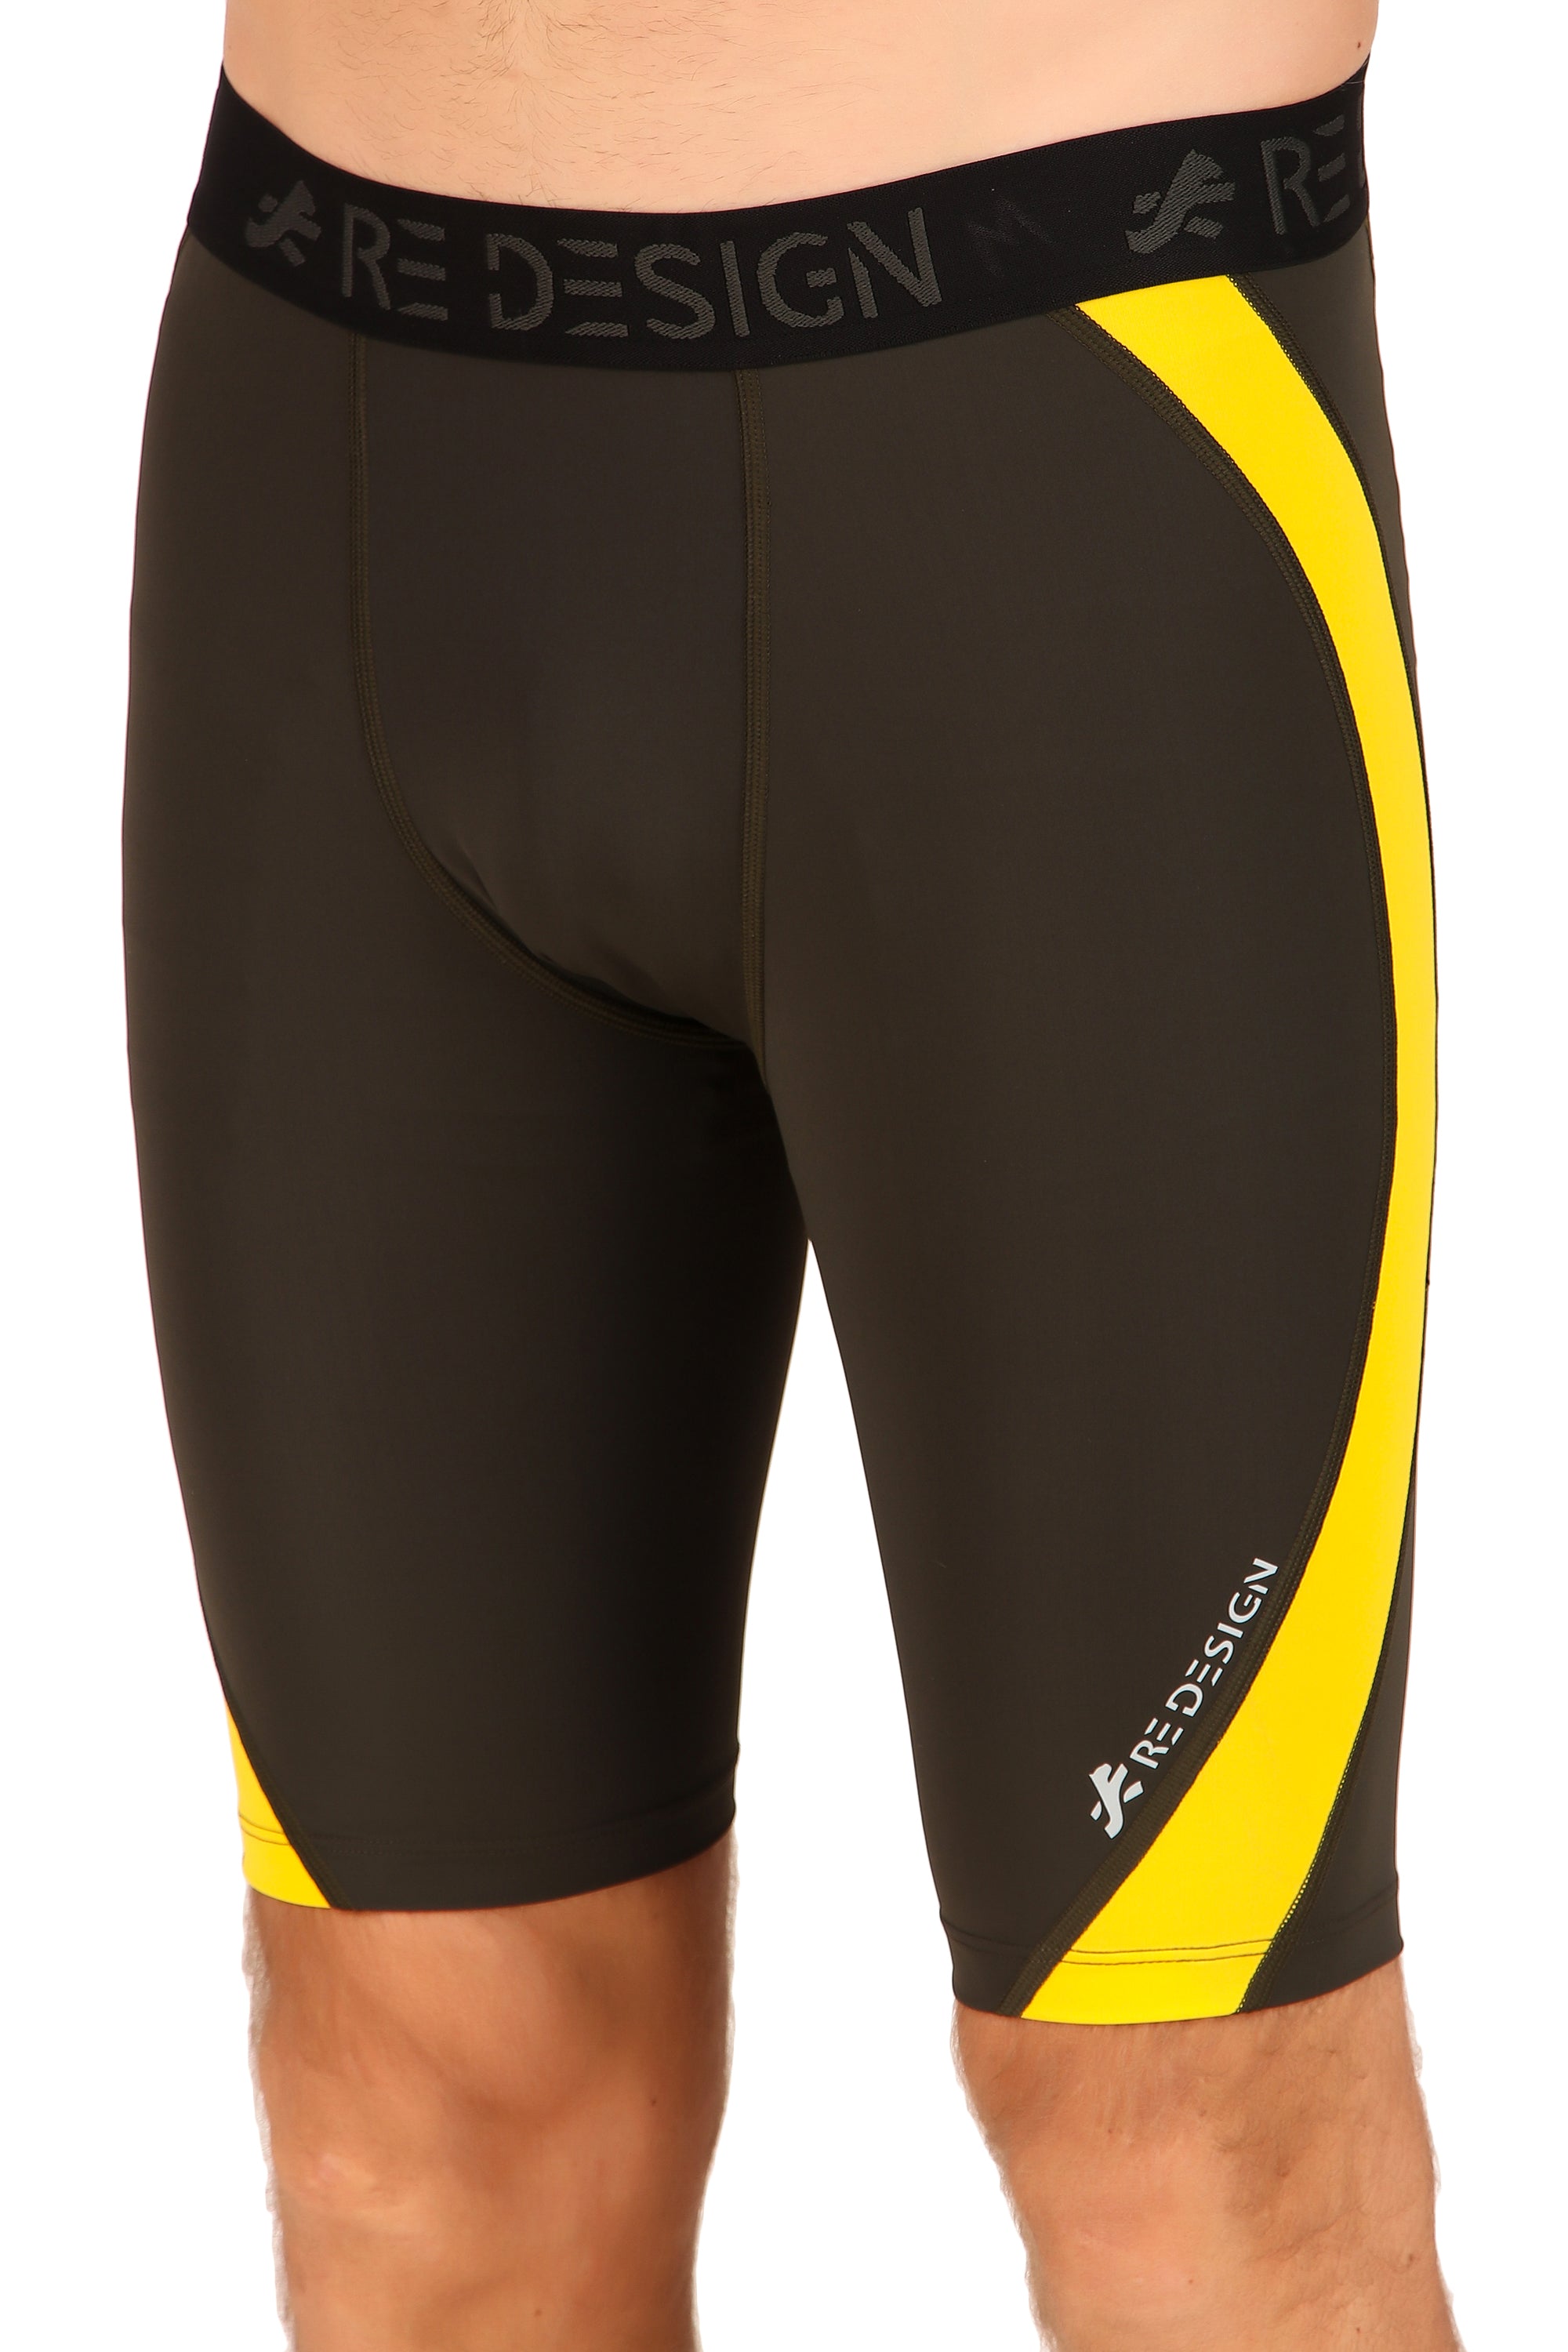 Men's Nylon DC Curve Compression Shorts and Half Tights For Men (Green/Yellow)